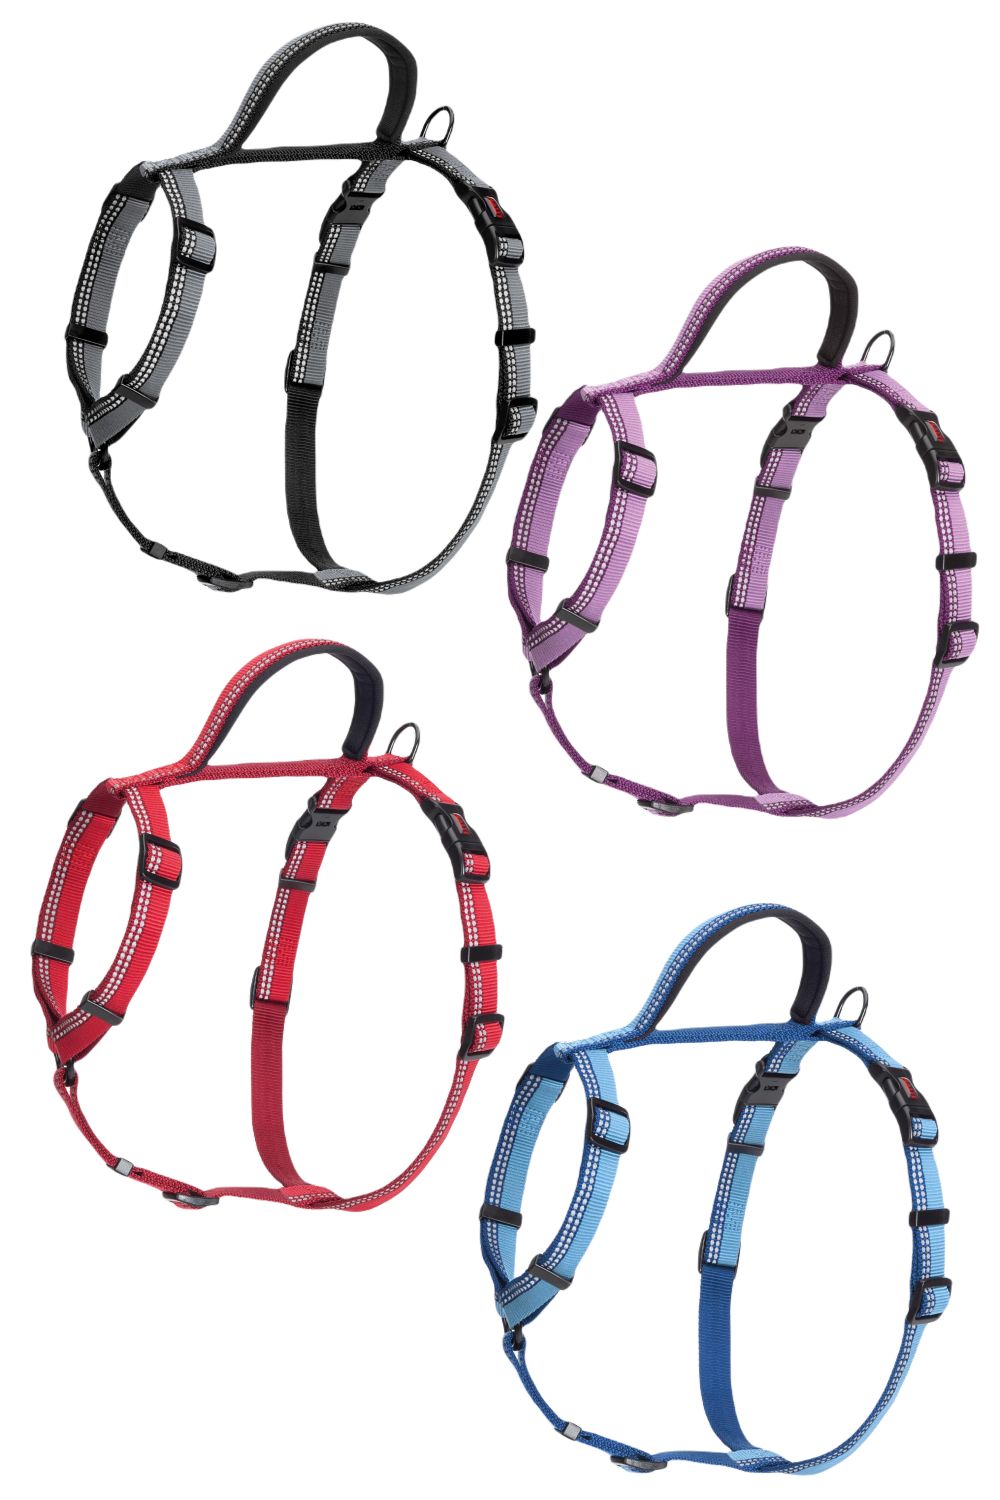 Halti Walking Harness In Black, Purple, Red and Blue